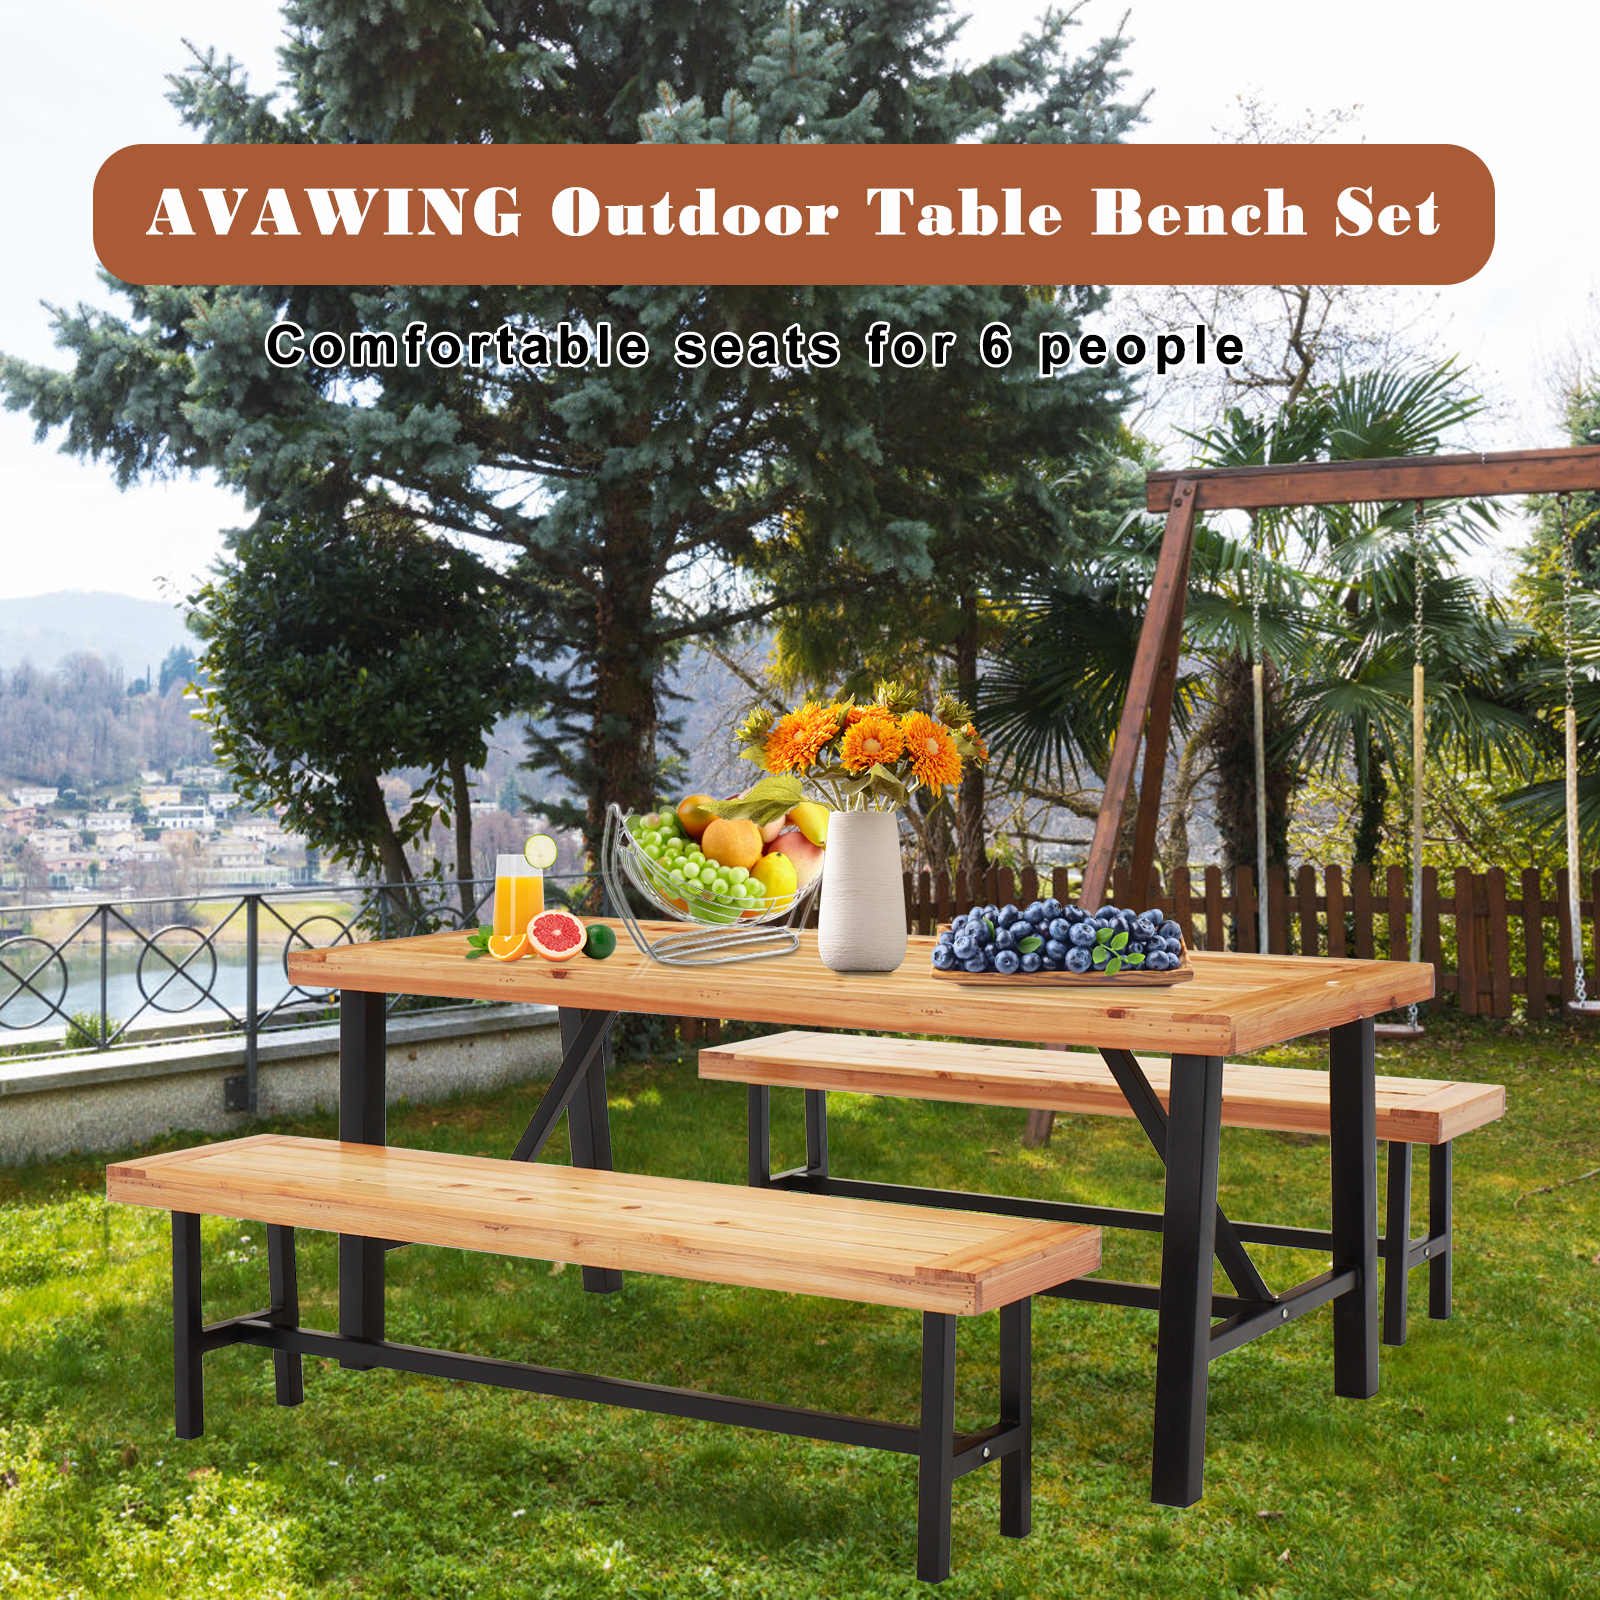 AVAWING 3-Piece Outdoor Wooden Picnic Table Bench Set, Premium Fir Wood Patio Furniture Set, Natural - image 5 of 7